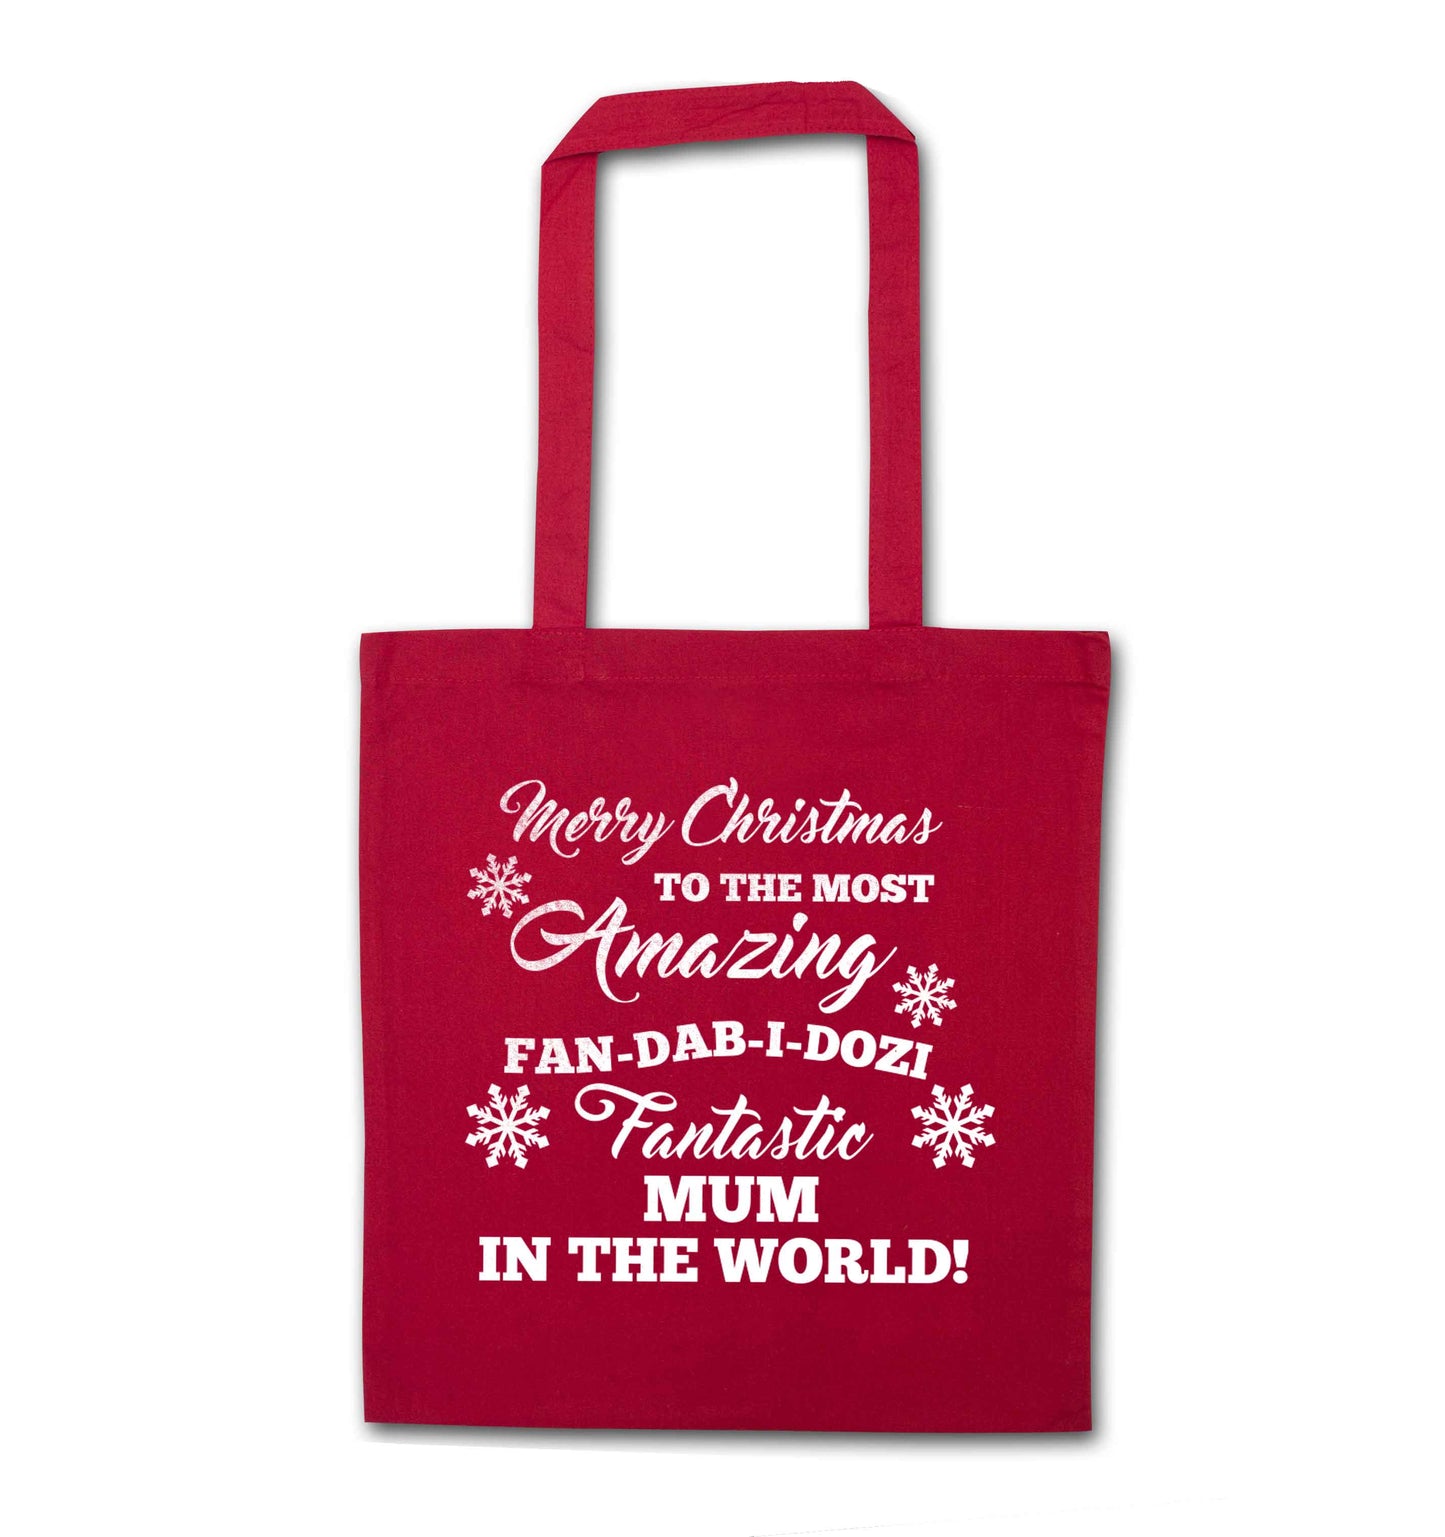 Merry Christmas to the most amazing fan-dab-i-dozi fantasic mum in the world red tote bag